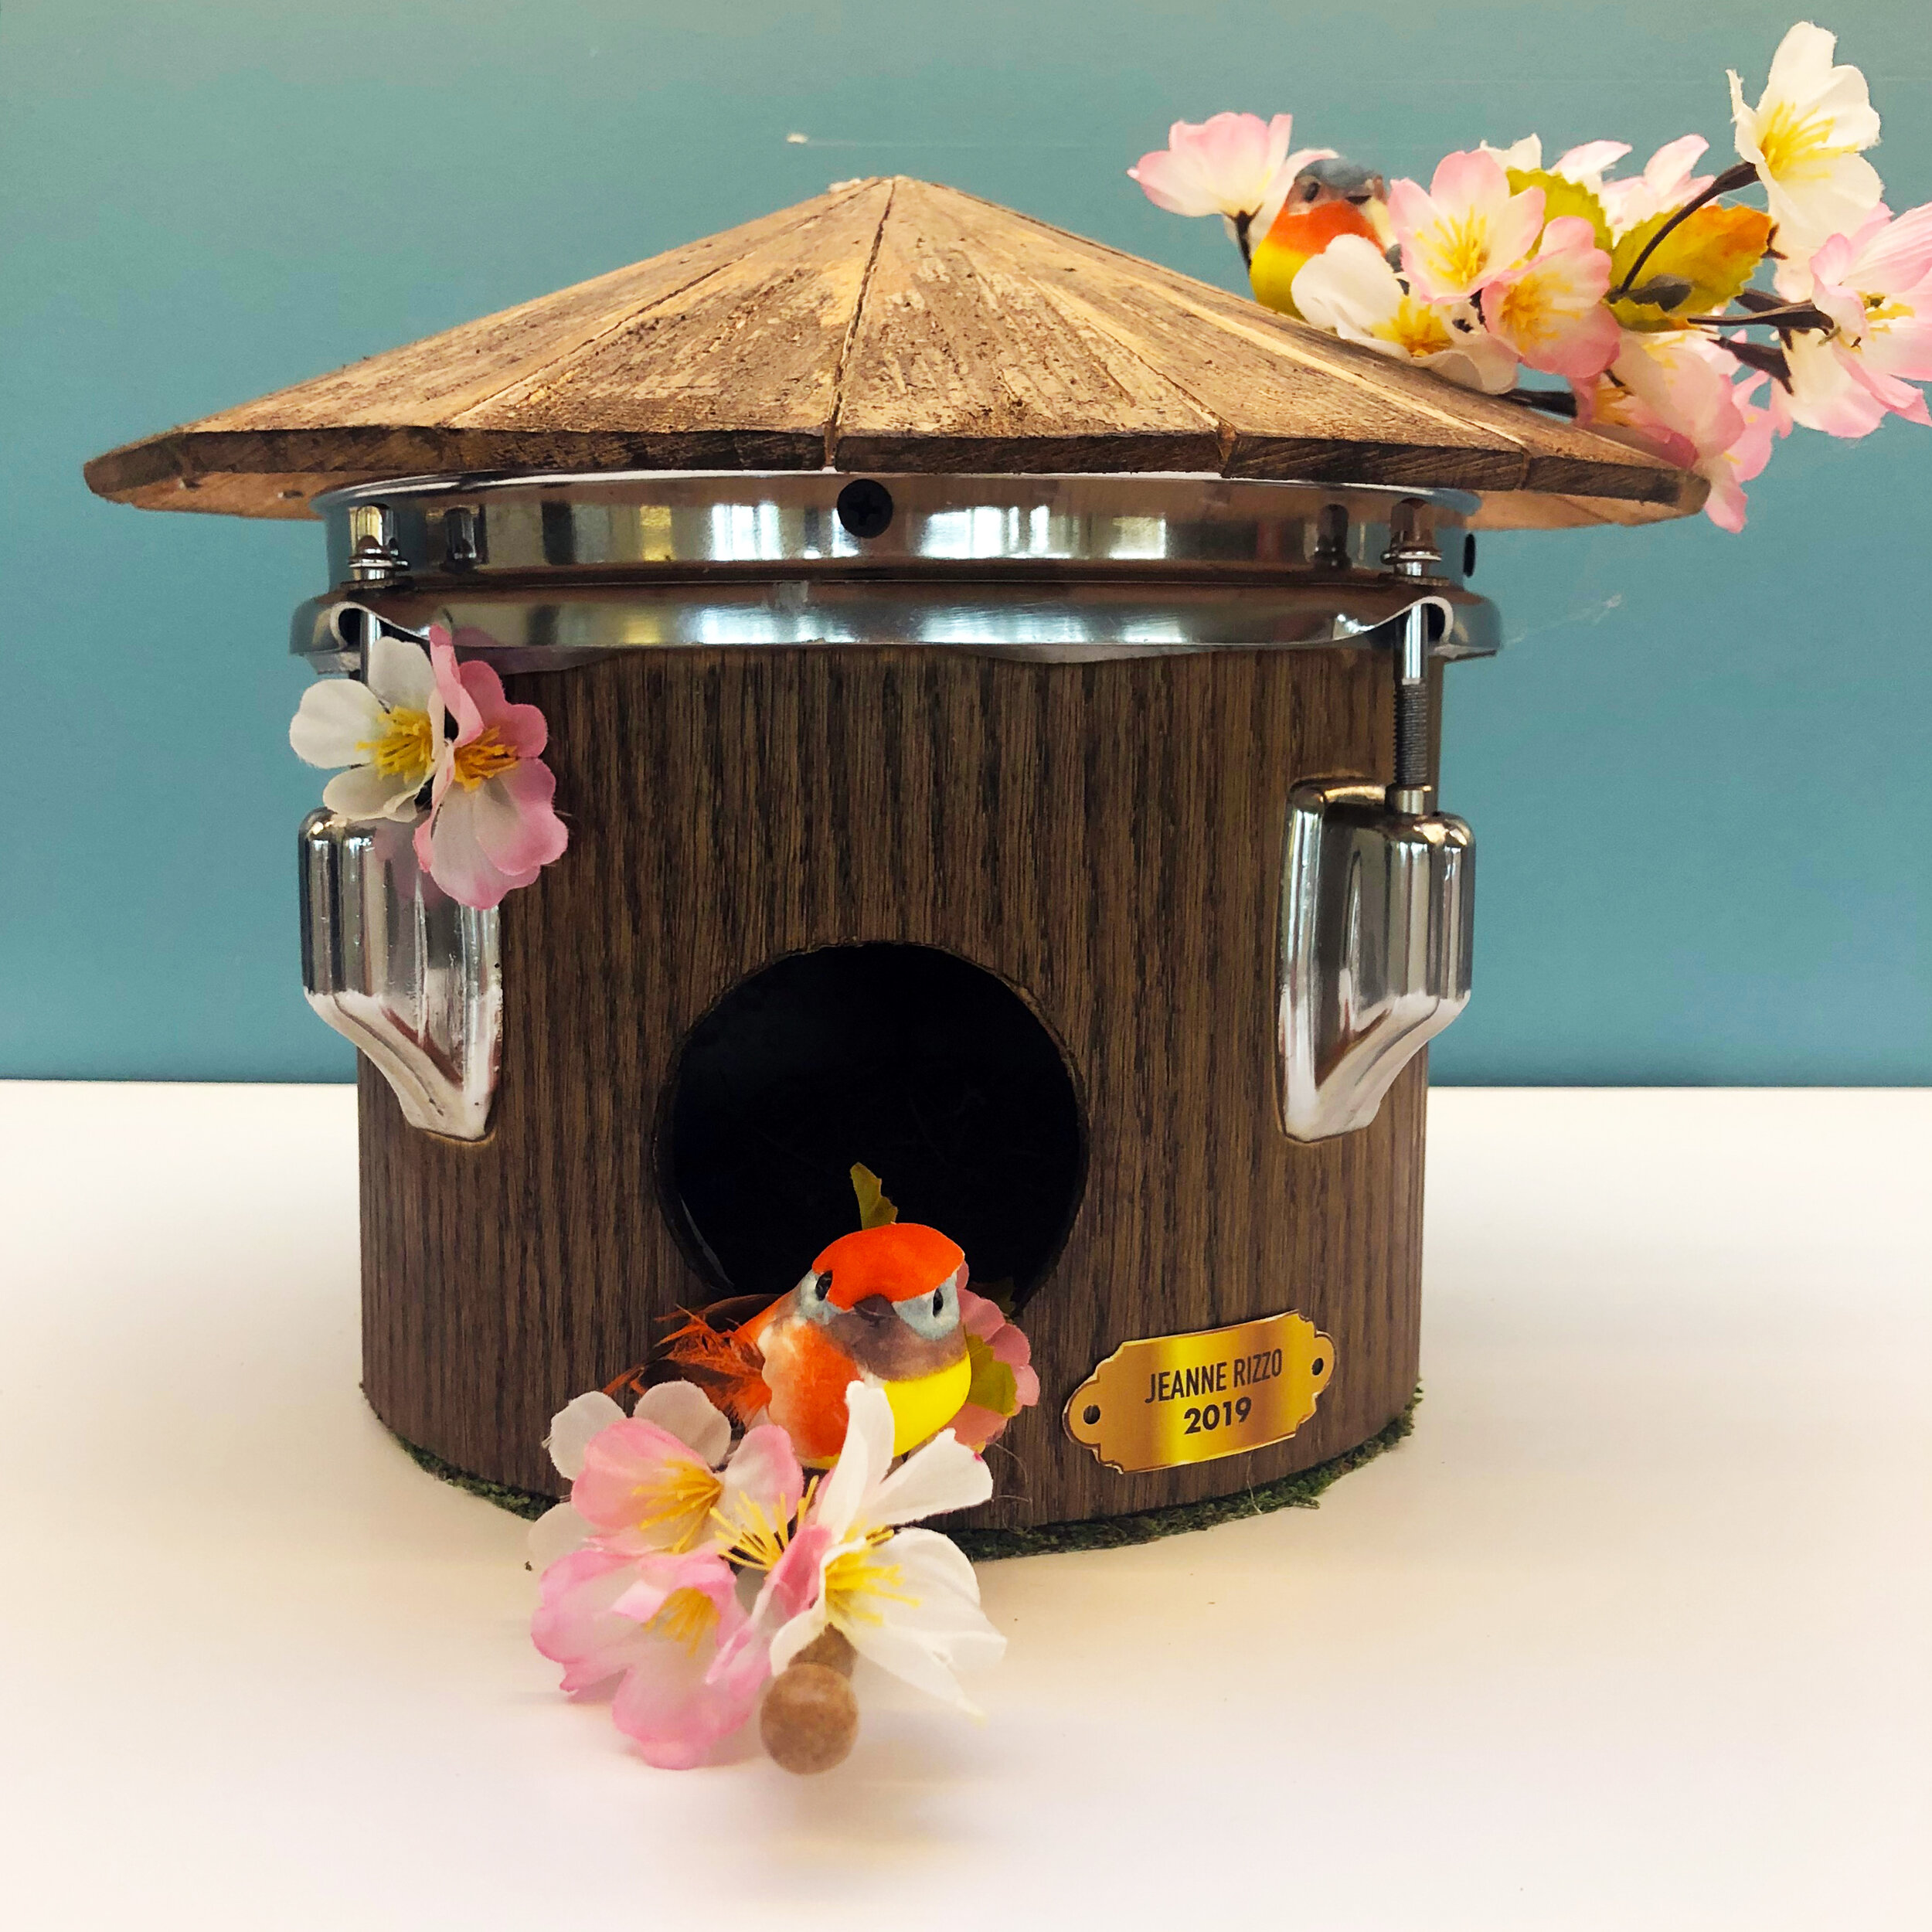 Drum Themed Birdhouse with Cherry Blossoms, 2019